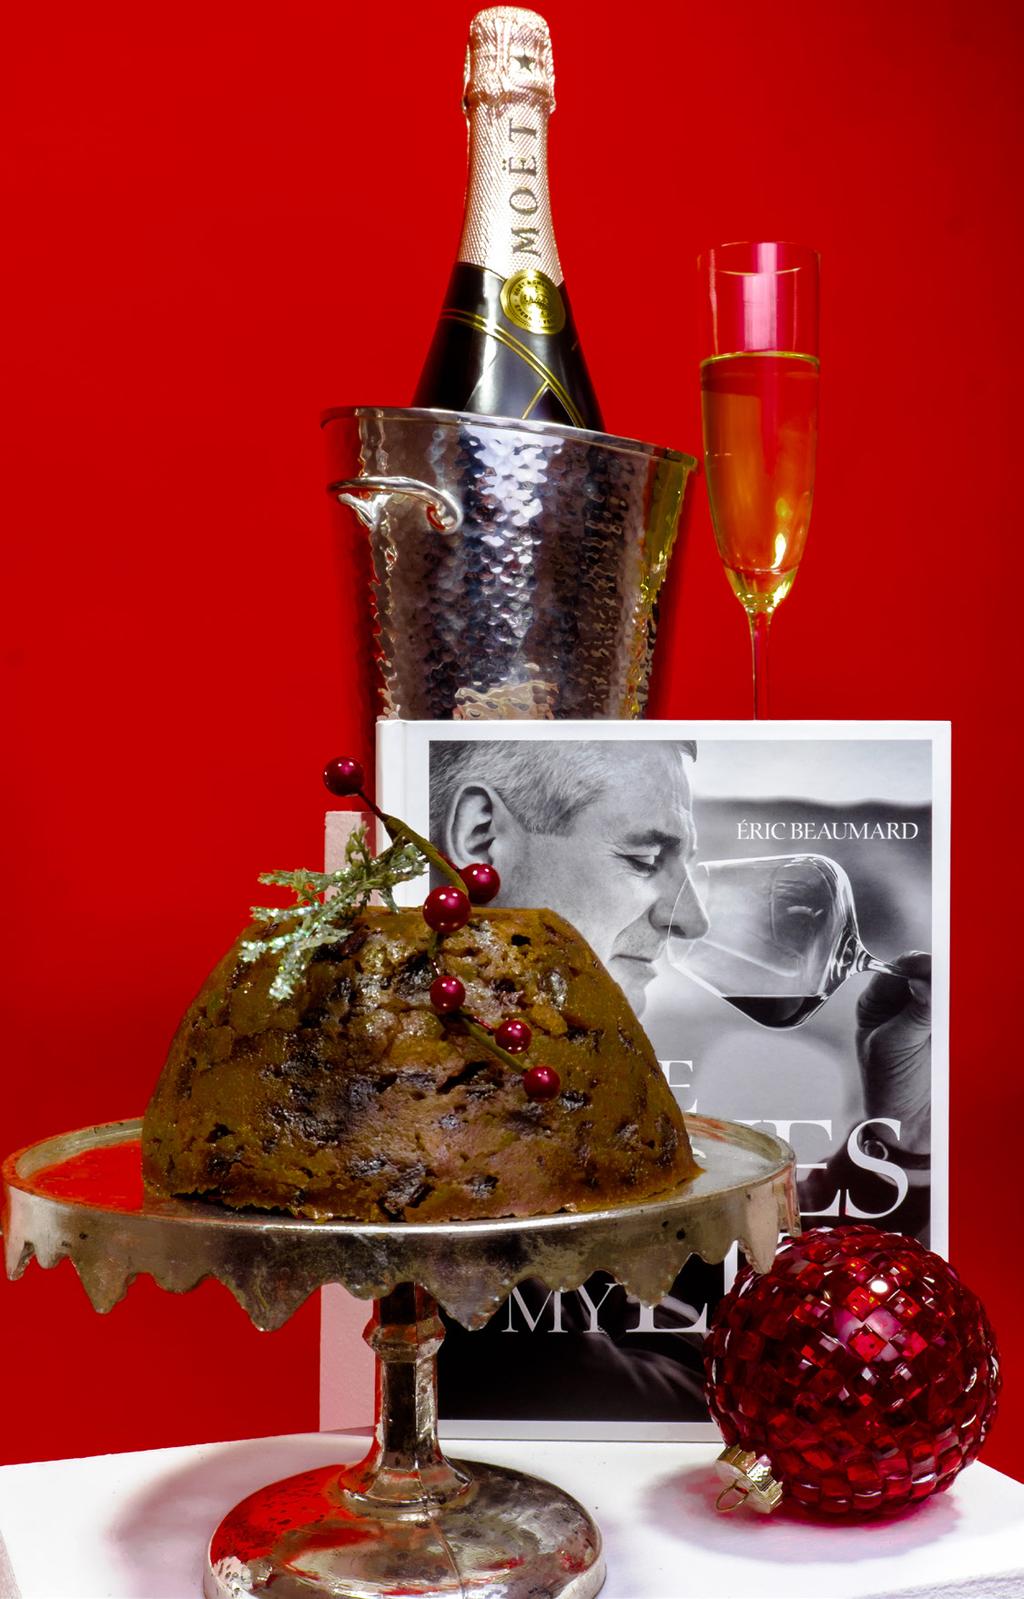 T H E SILVER RANGE THE VISCOUNT SILVER CHAMPAGNE COOLER IMPERIAL CHAMPAGNE PAIR OF CHAMPAGNE FLUTES FESTIVE DECORATION DELUXE PHOTO FRAME MEDIUM LUXURY SCENTED DIFFUSER BOX OF GOURMET CHOCOLATES THE